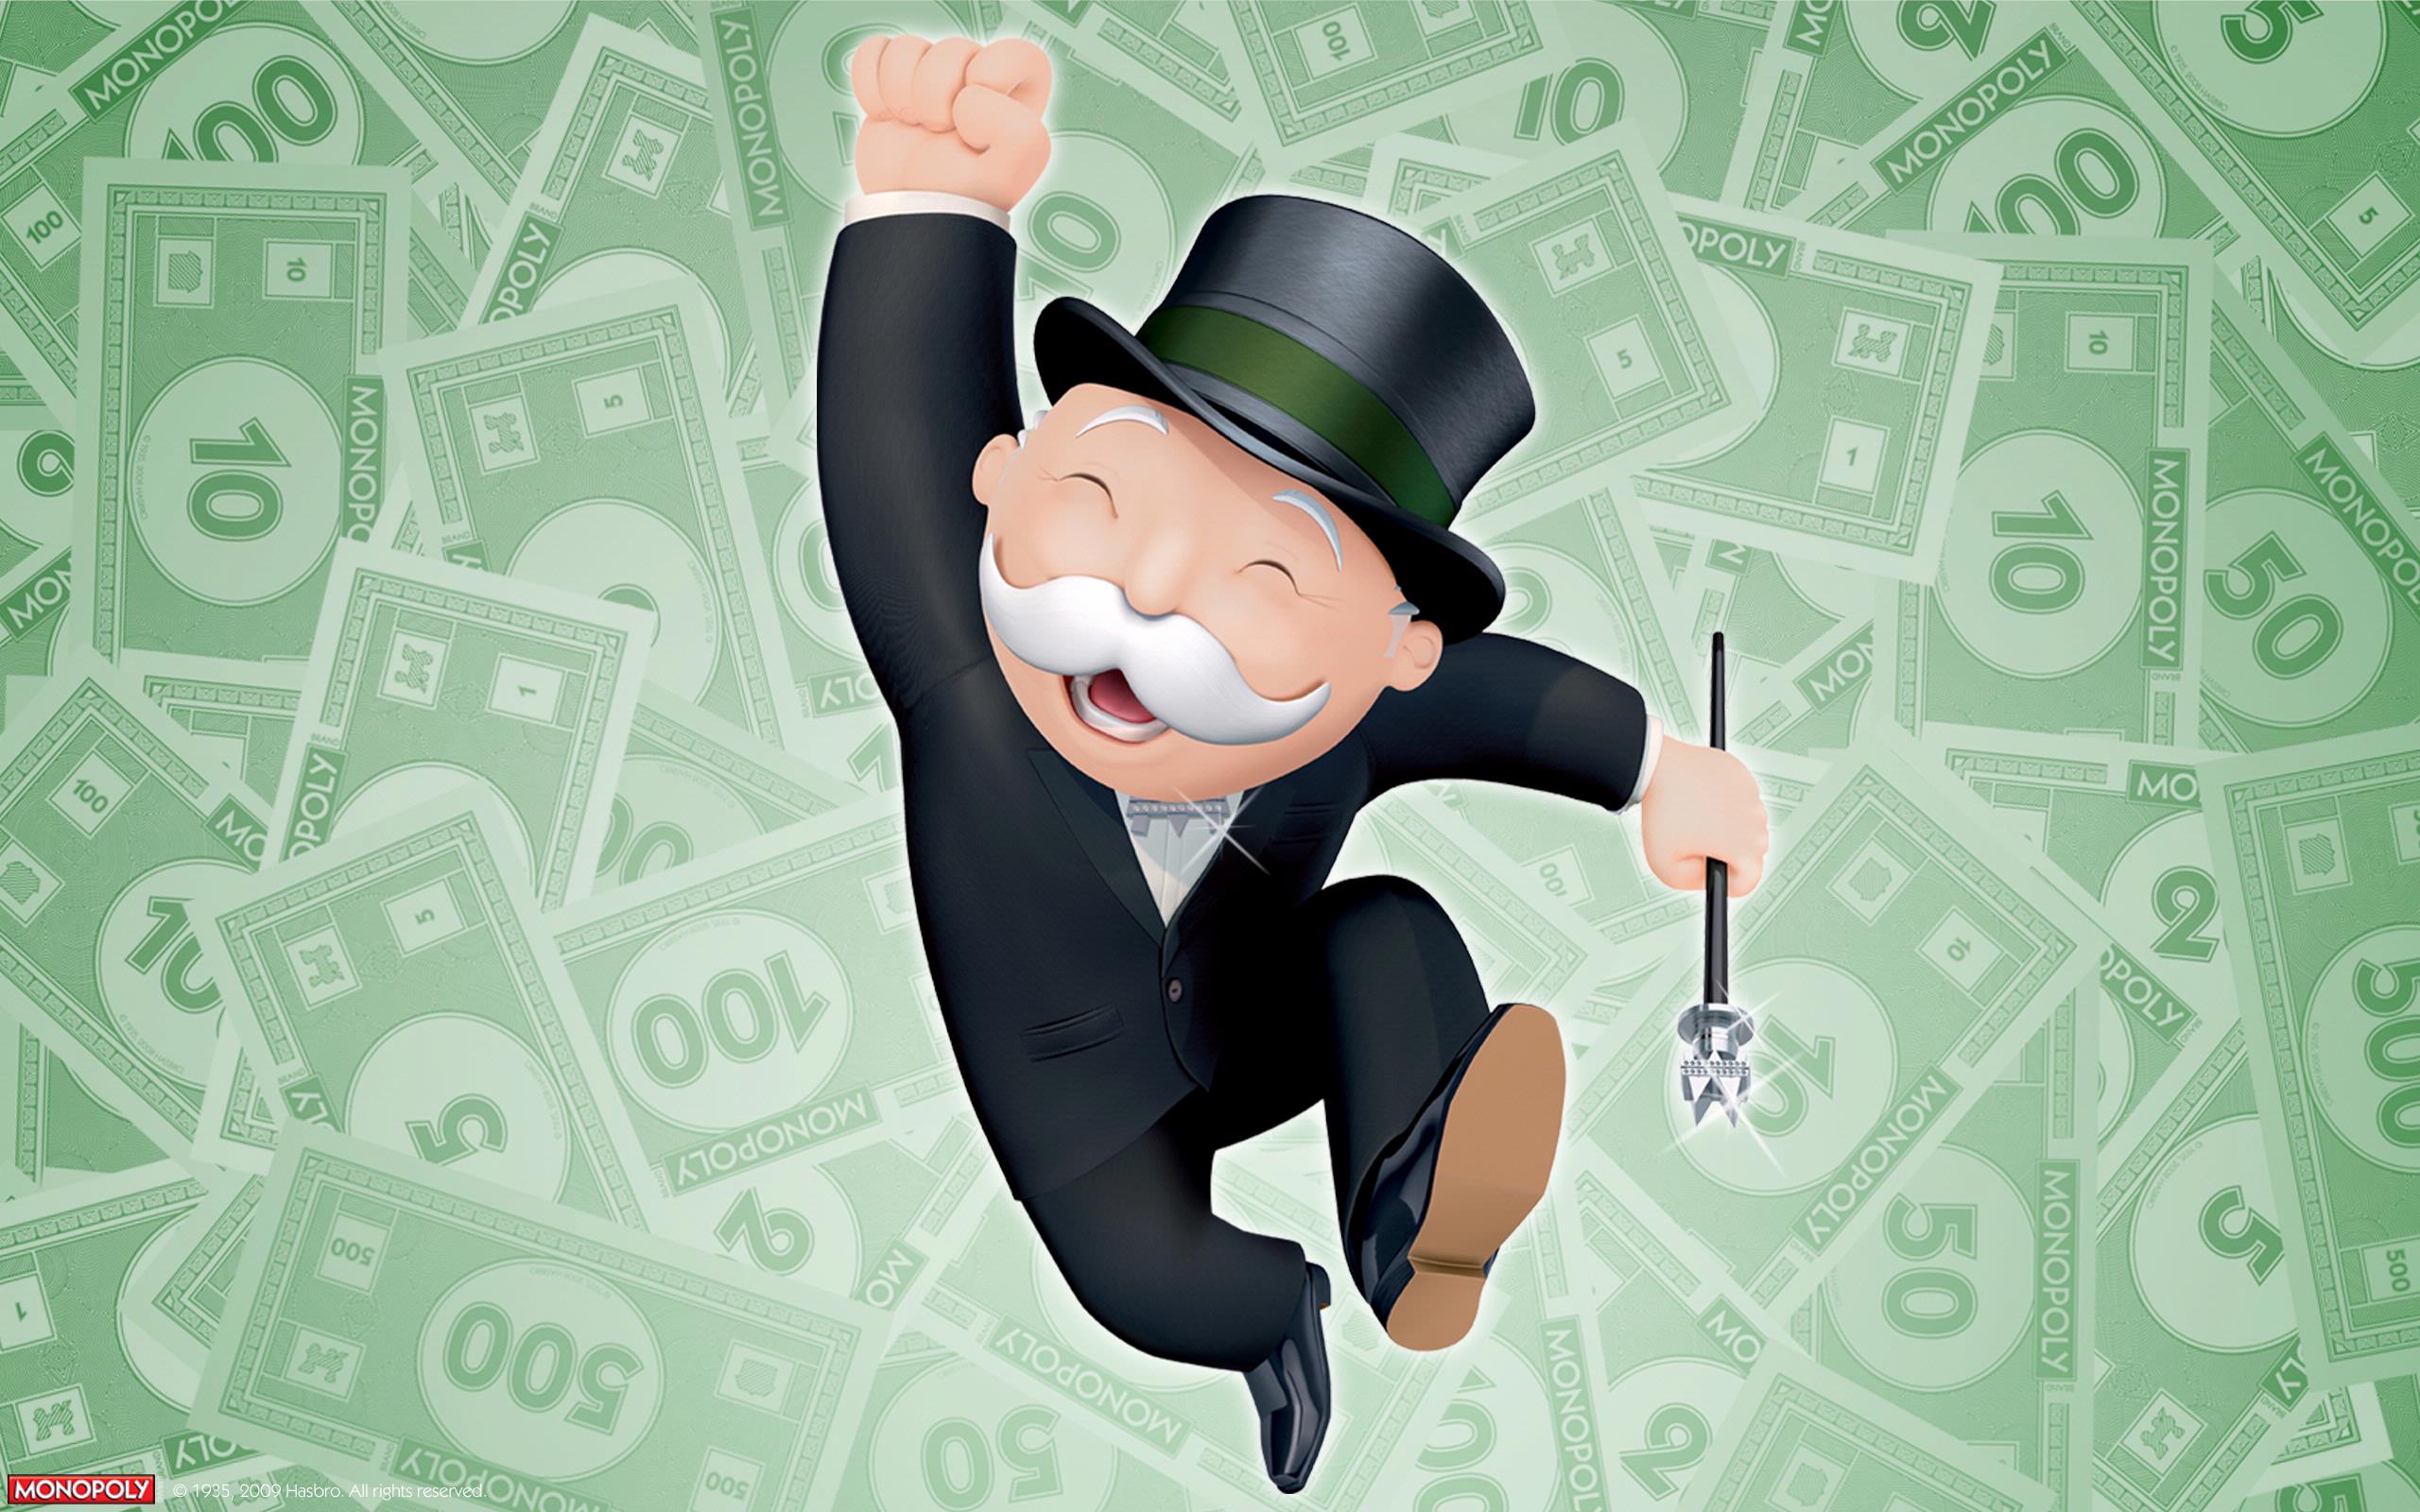 Monopoly Wallpapers